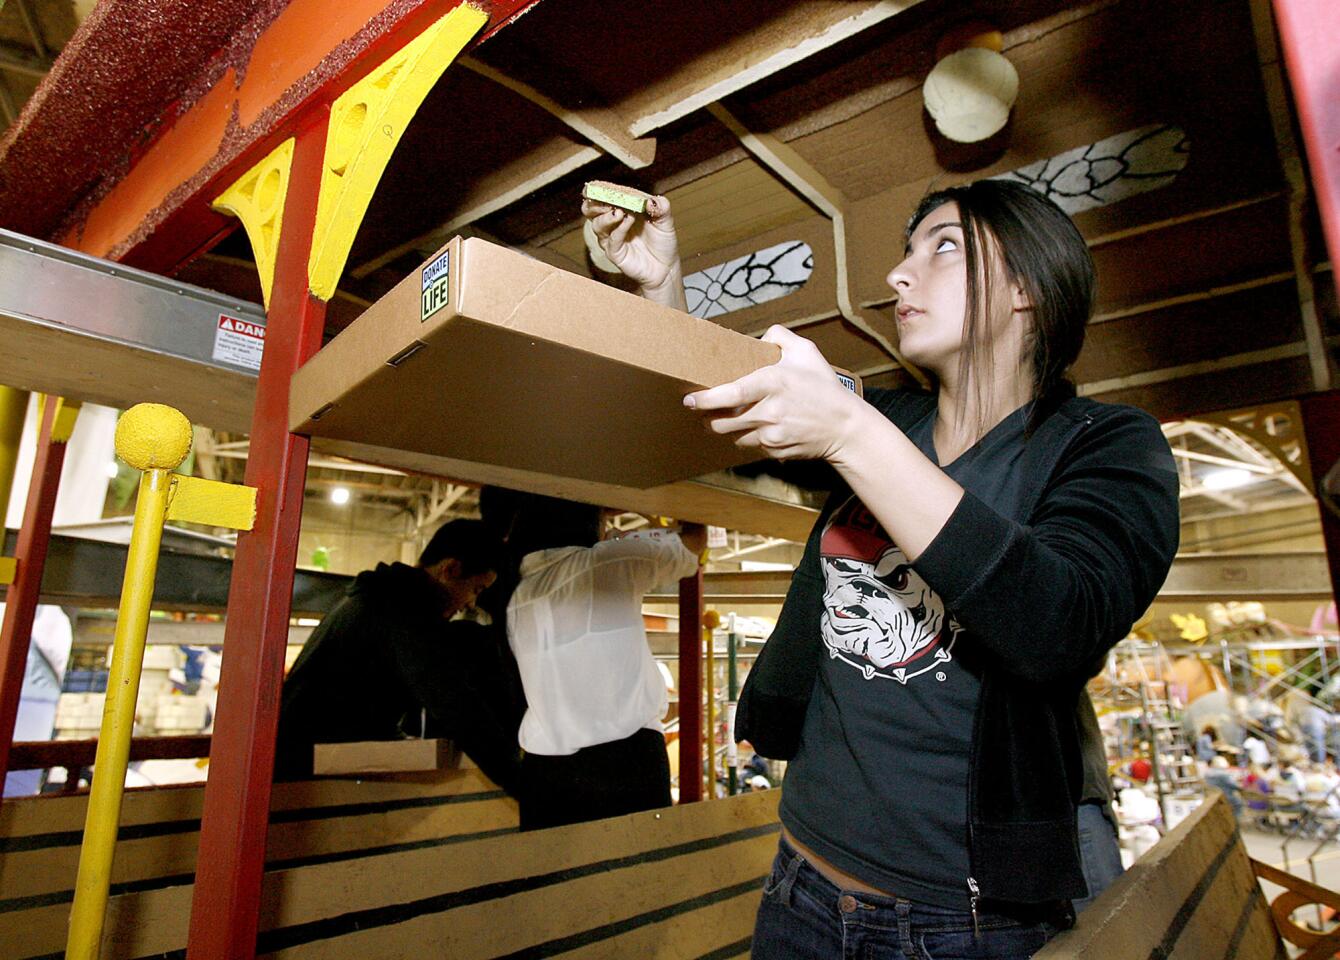 Petra Beglarian, 16 and a junior at Clark Magnet High School in La Crescenta, helps decorate the inside of a trolley replica on the city of Glendale float, at Phoenix Decorating Company in Pasadena on Saturday, December 22, 2012.